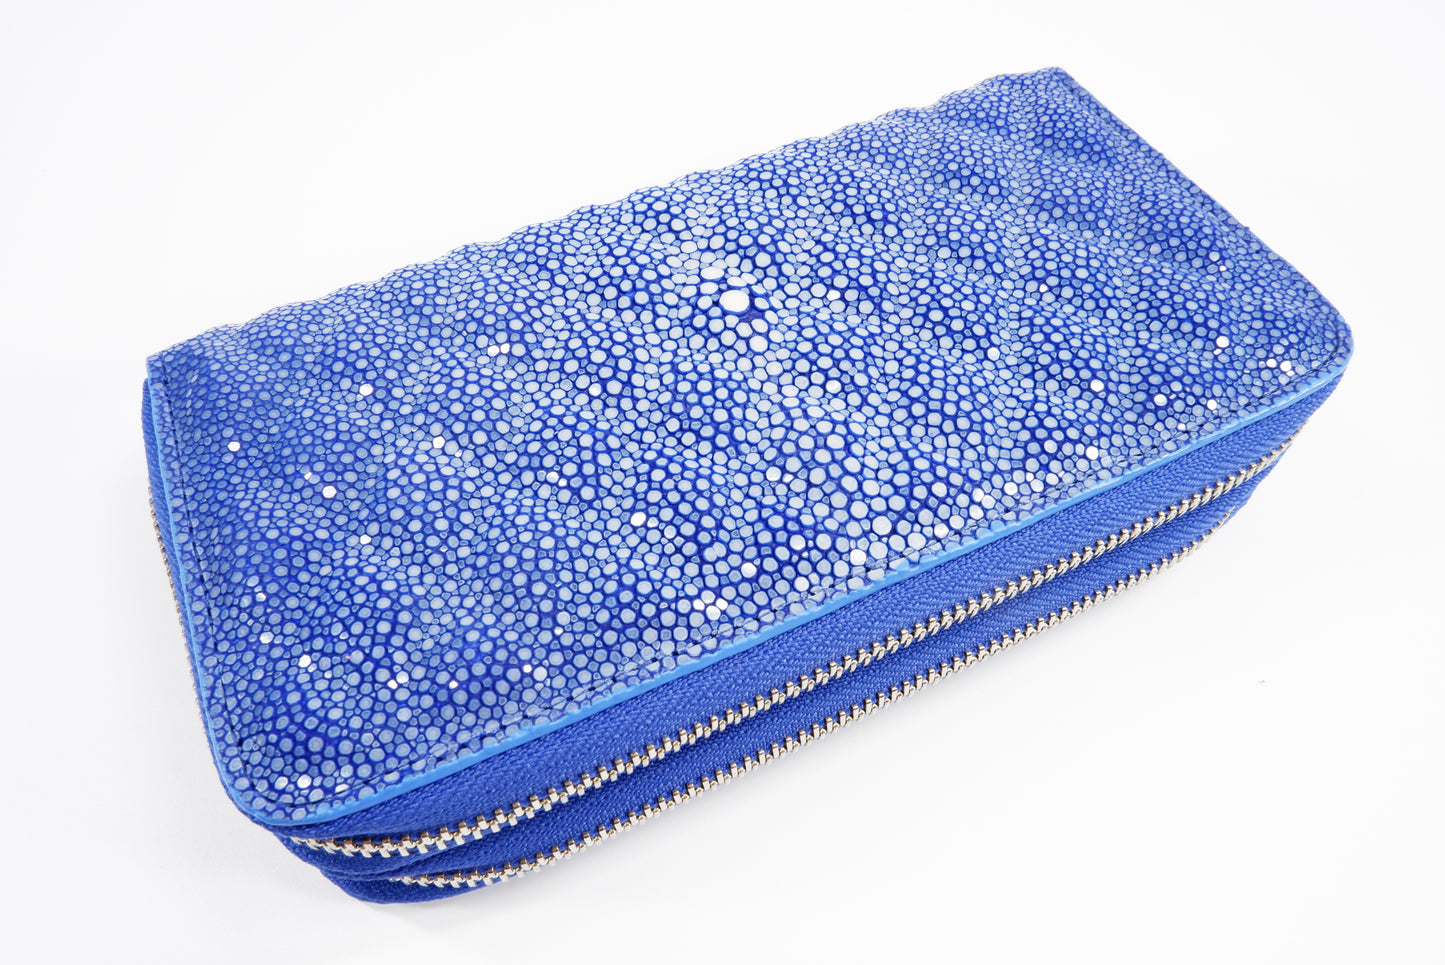 Genuine Polished Stingray Skin Leather Embossed Double Zip Around Clutch Wallet Purse